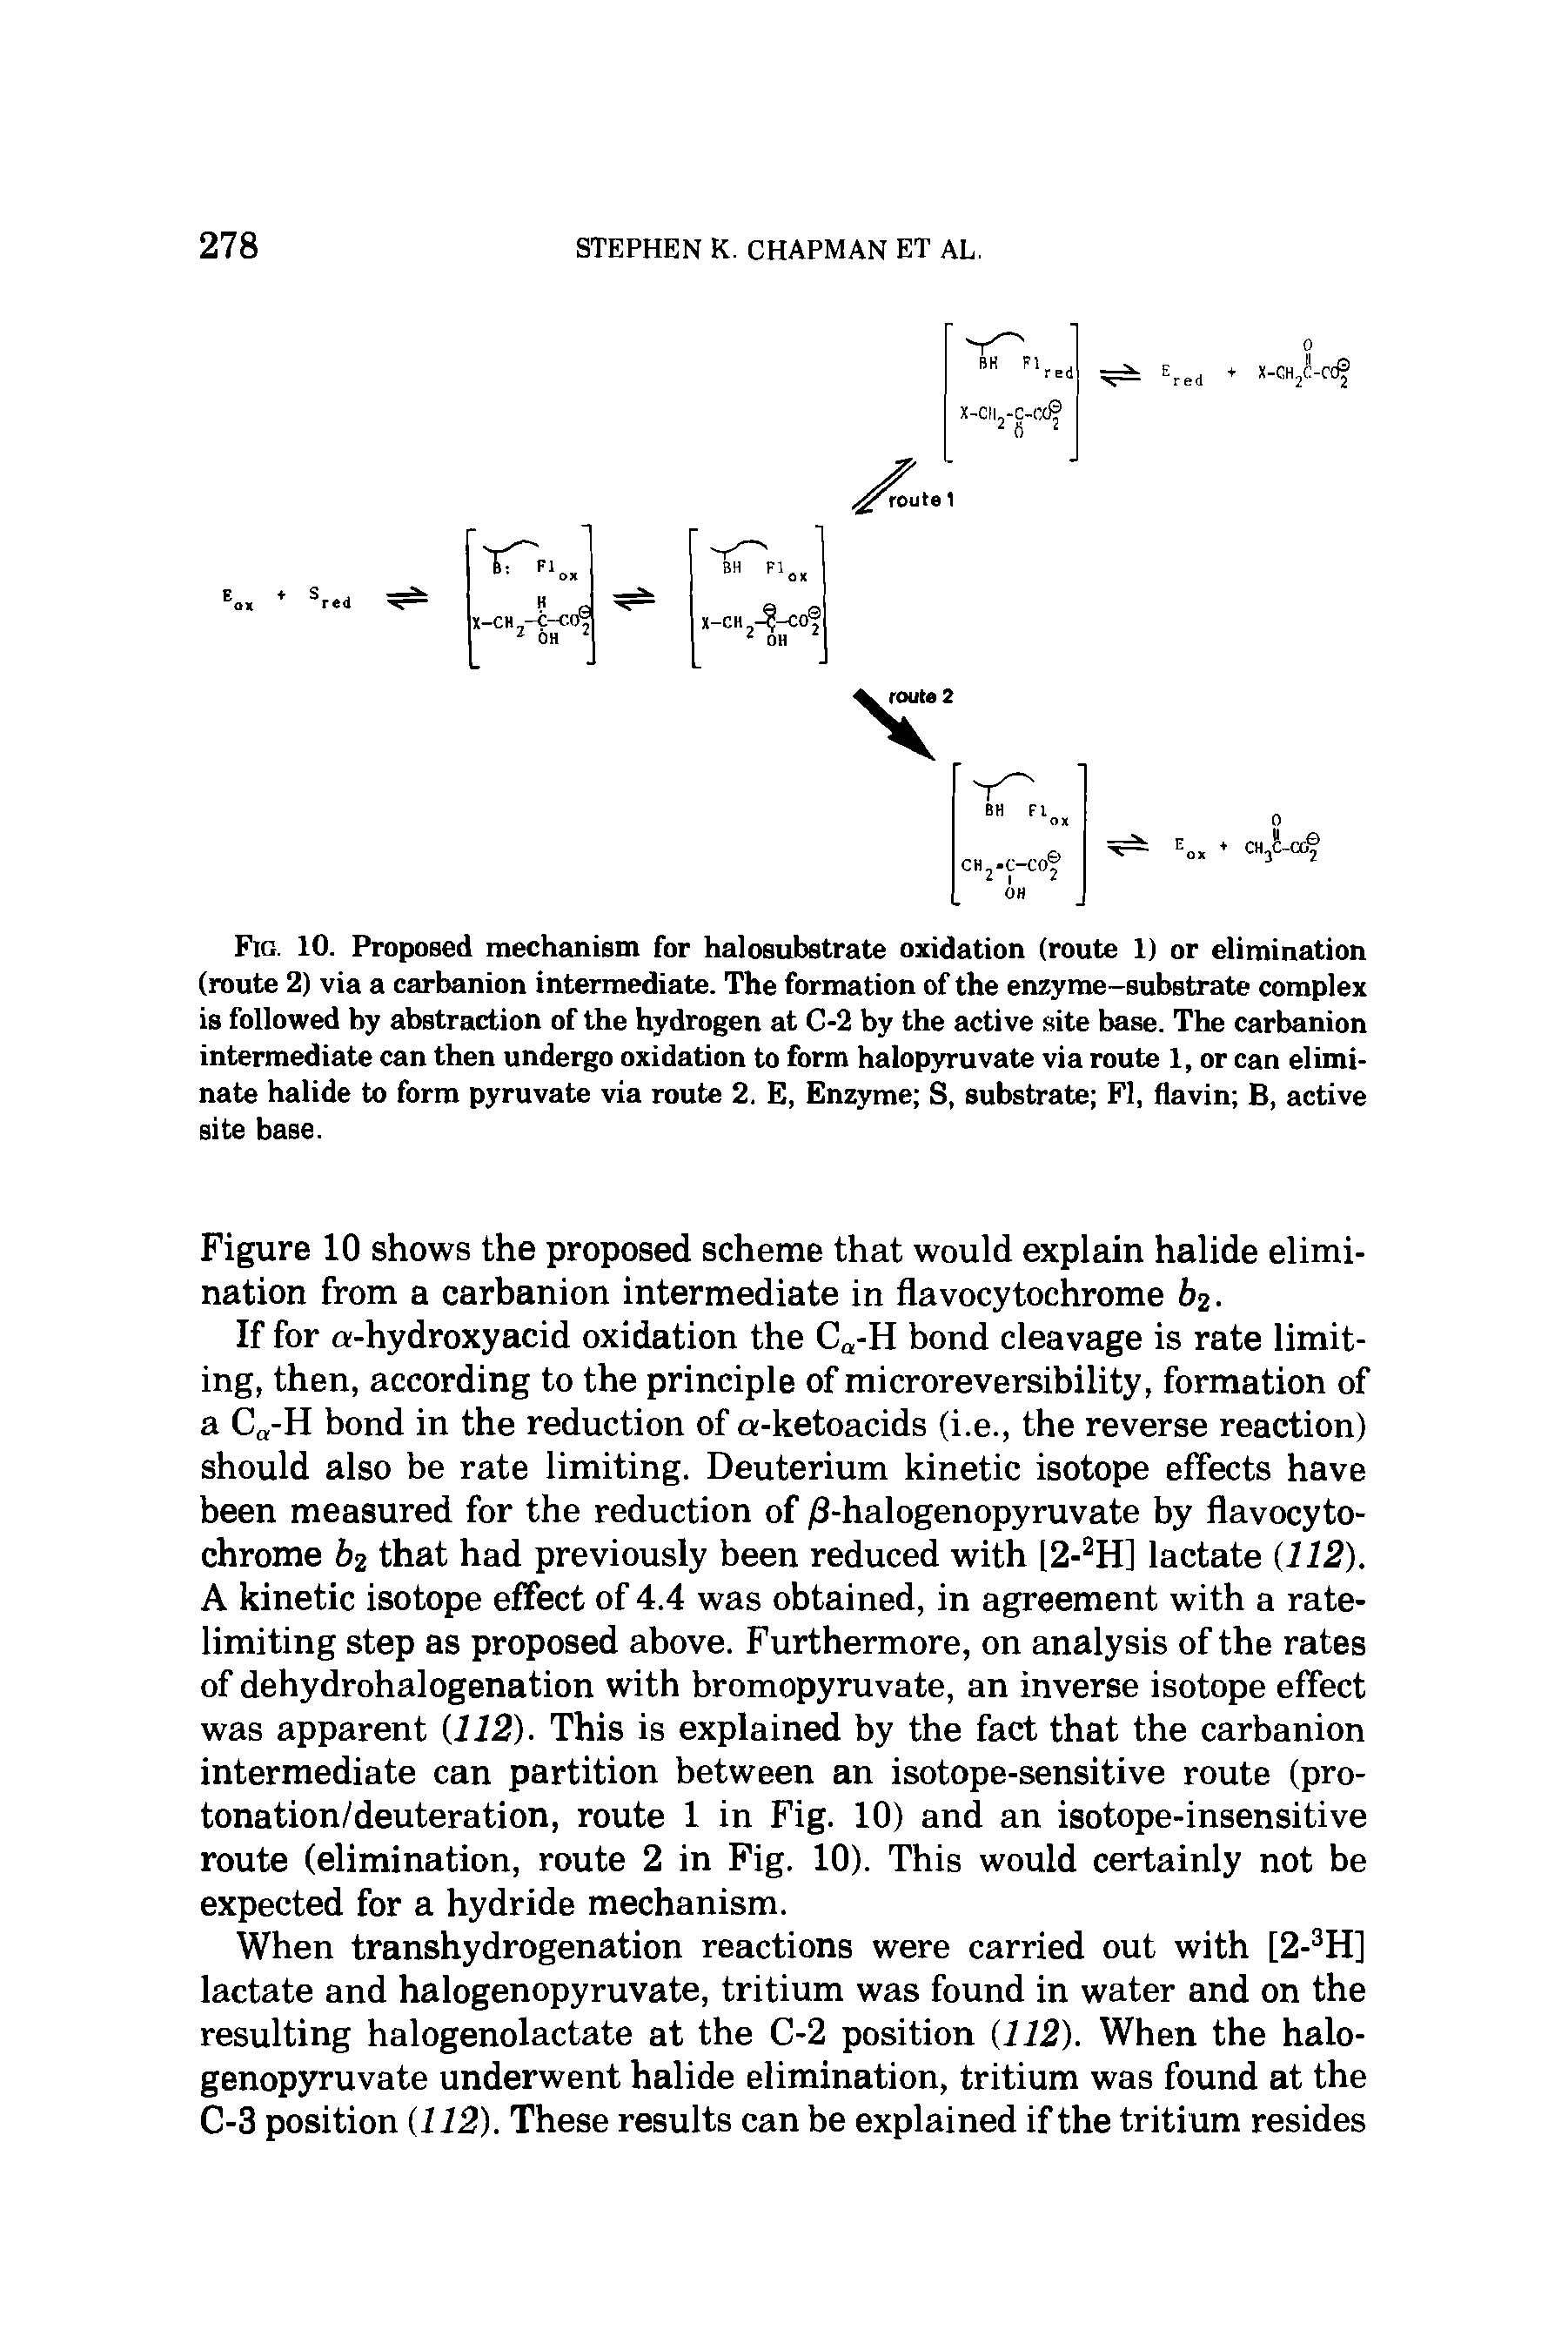 Fig. 10. Proposed mechanism for halosubstrate oxidation (route 1) or elimination (route 2) via a carbanion intermediate. The formation of the enzyme-substrate complex is followed by abstraction of the hydrogen at C-2 by the active site base. The carbanion intermediate can then undergo oxidation to form halopyruvate via route 1, or can eliminate halide to form pyruvate via route 2. E, Enzyme S, substrate FI, flavin B, active site base.